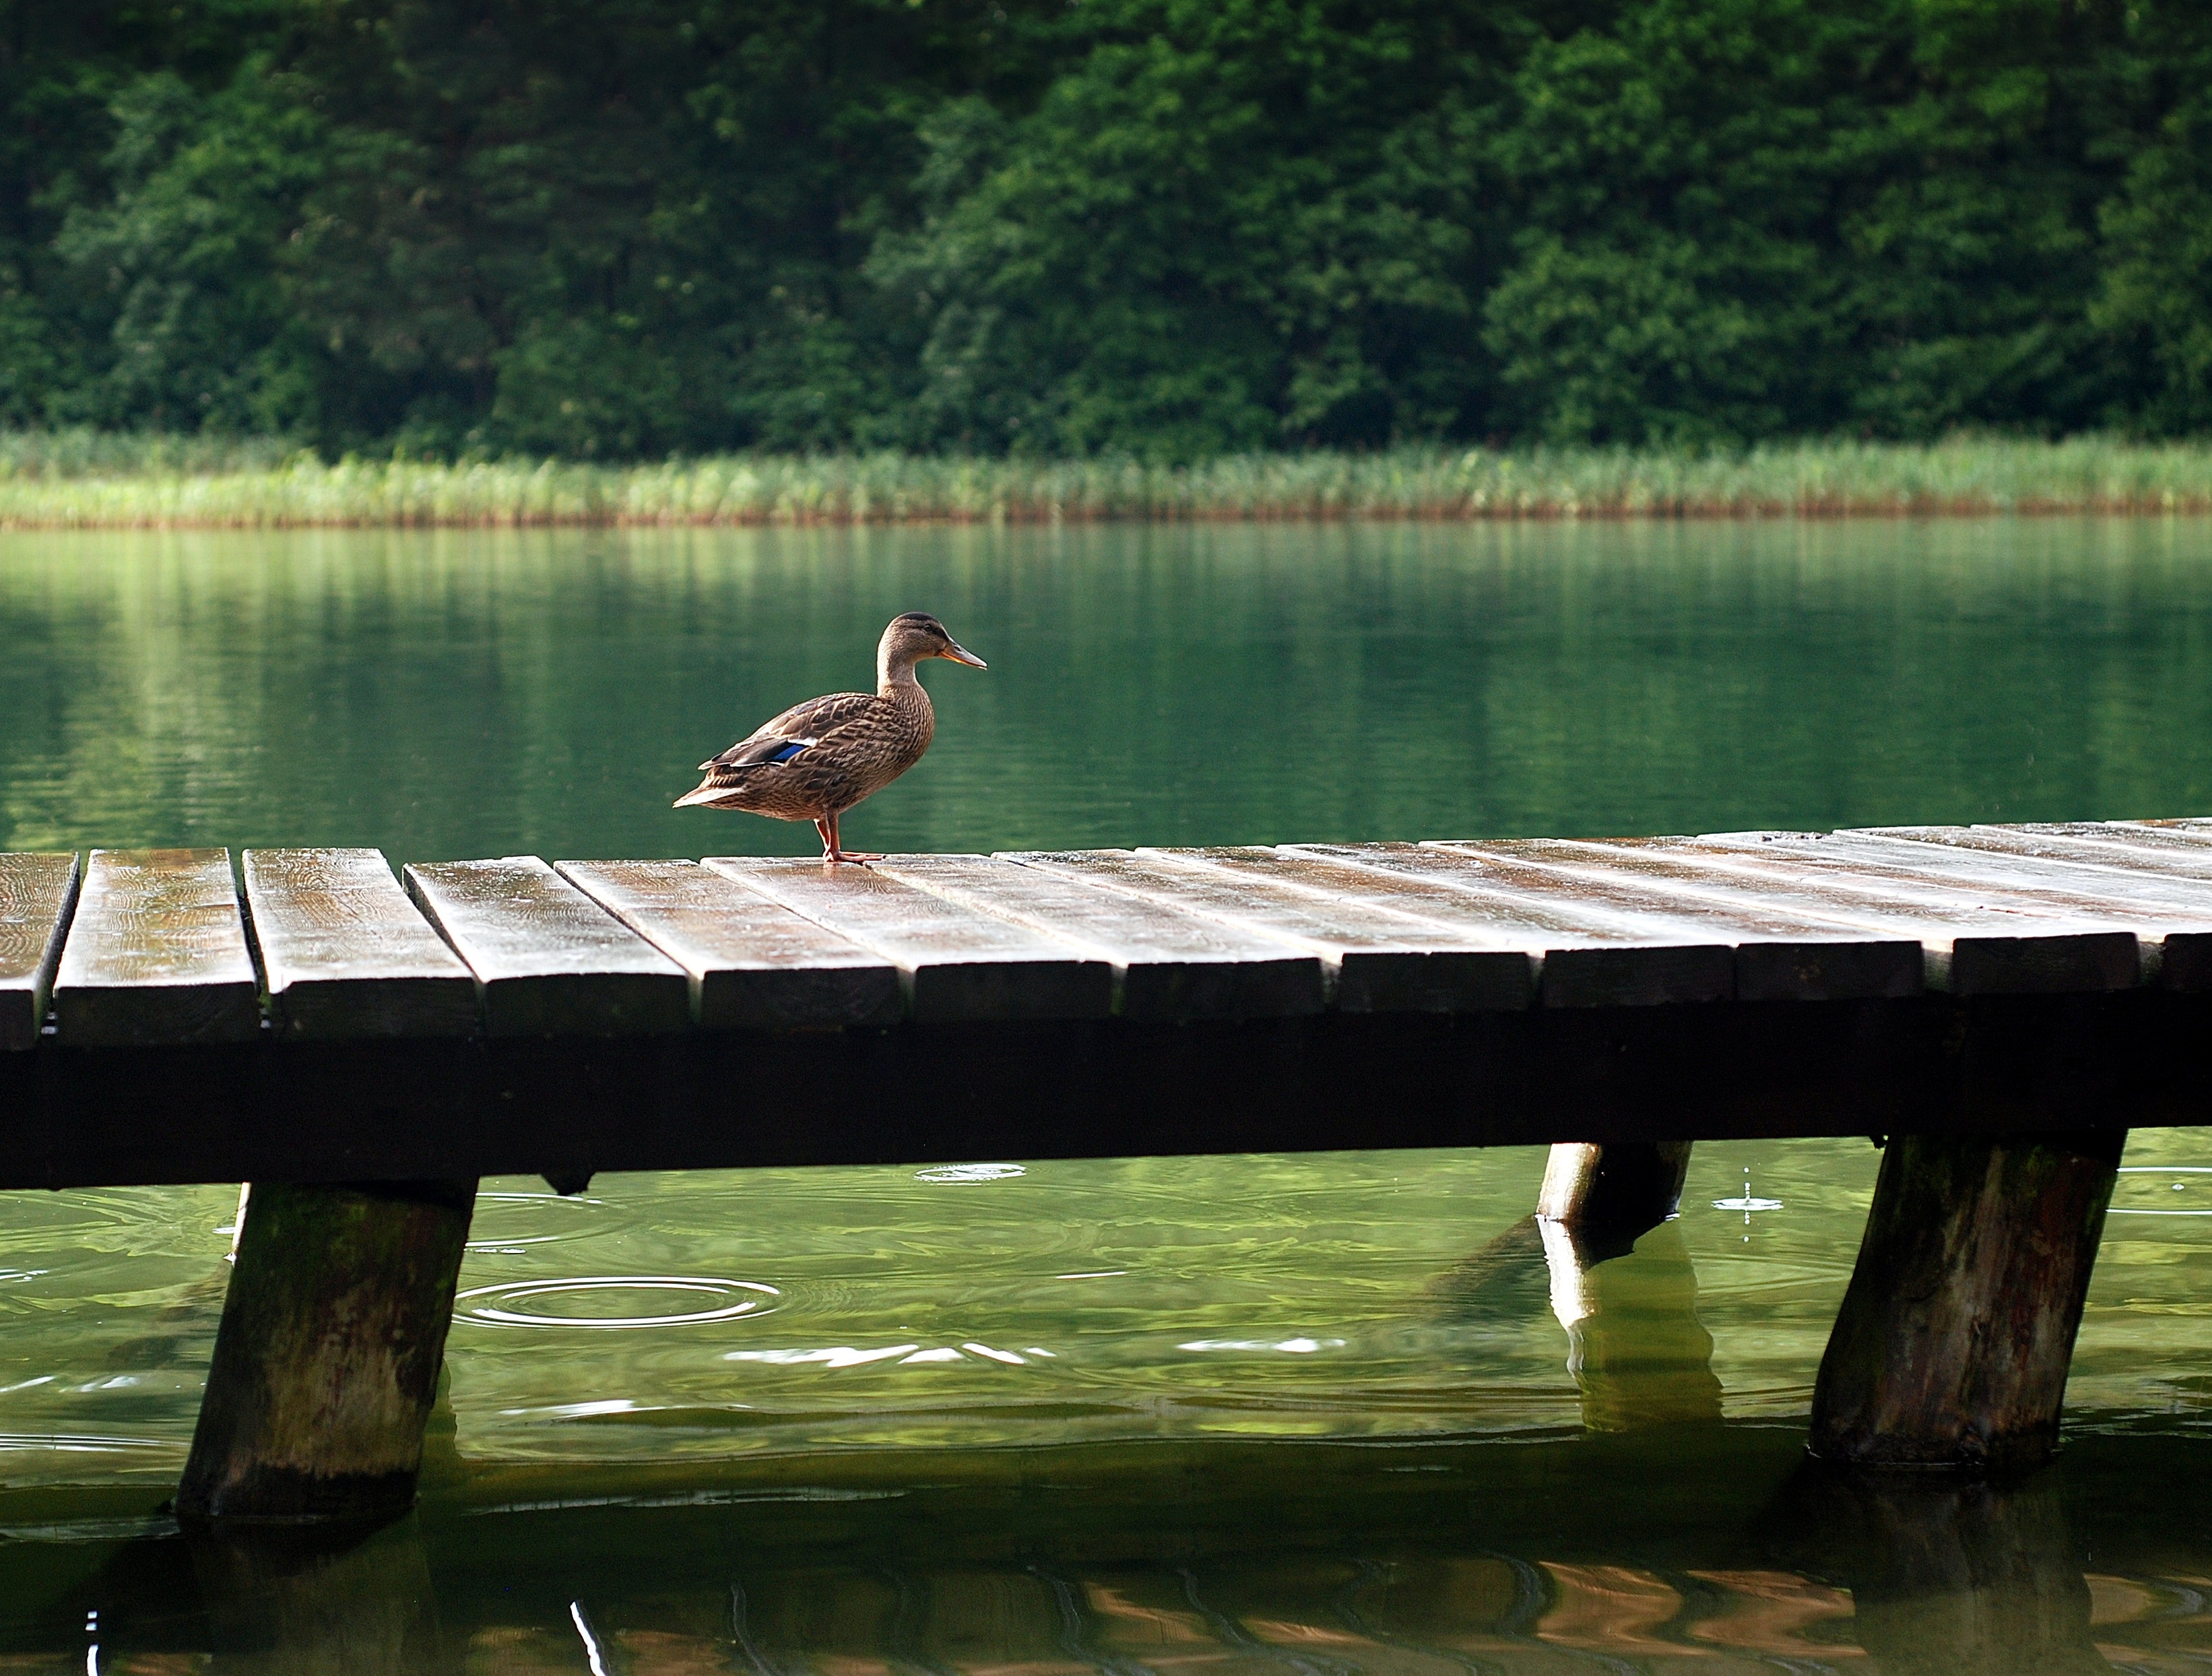 Duck on wooden dock at daytime photo